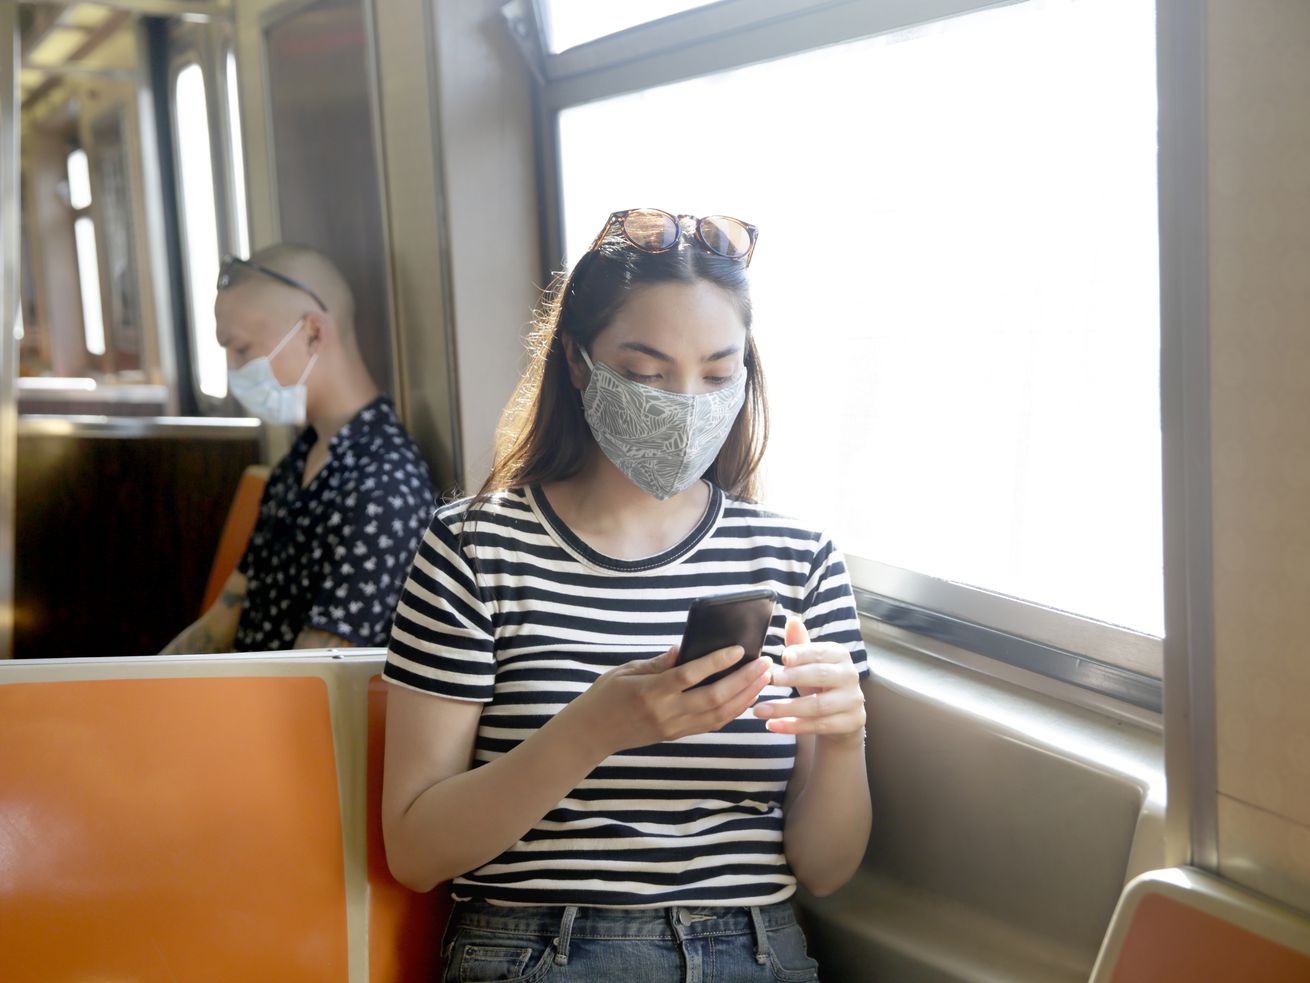 Two face-masked people sitting in a subway car, each looking at their phone.